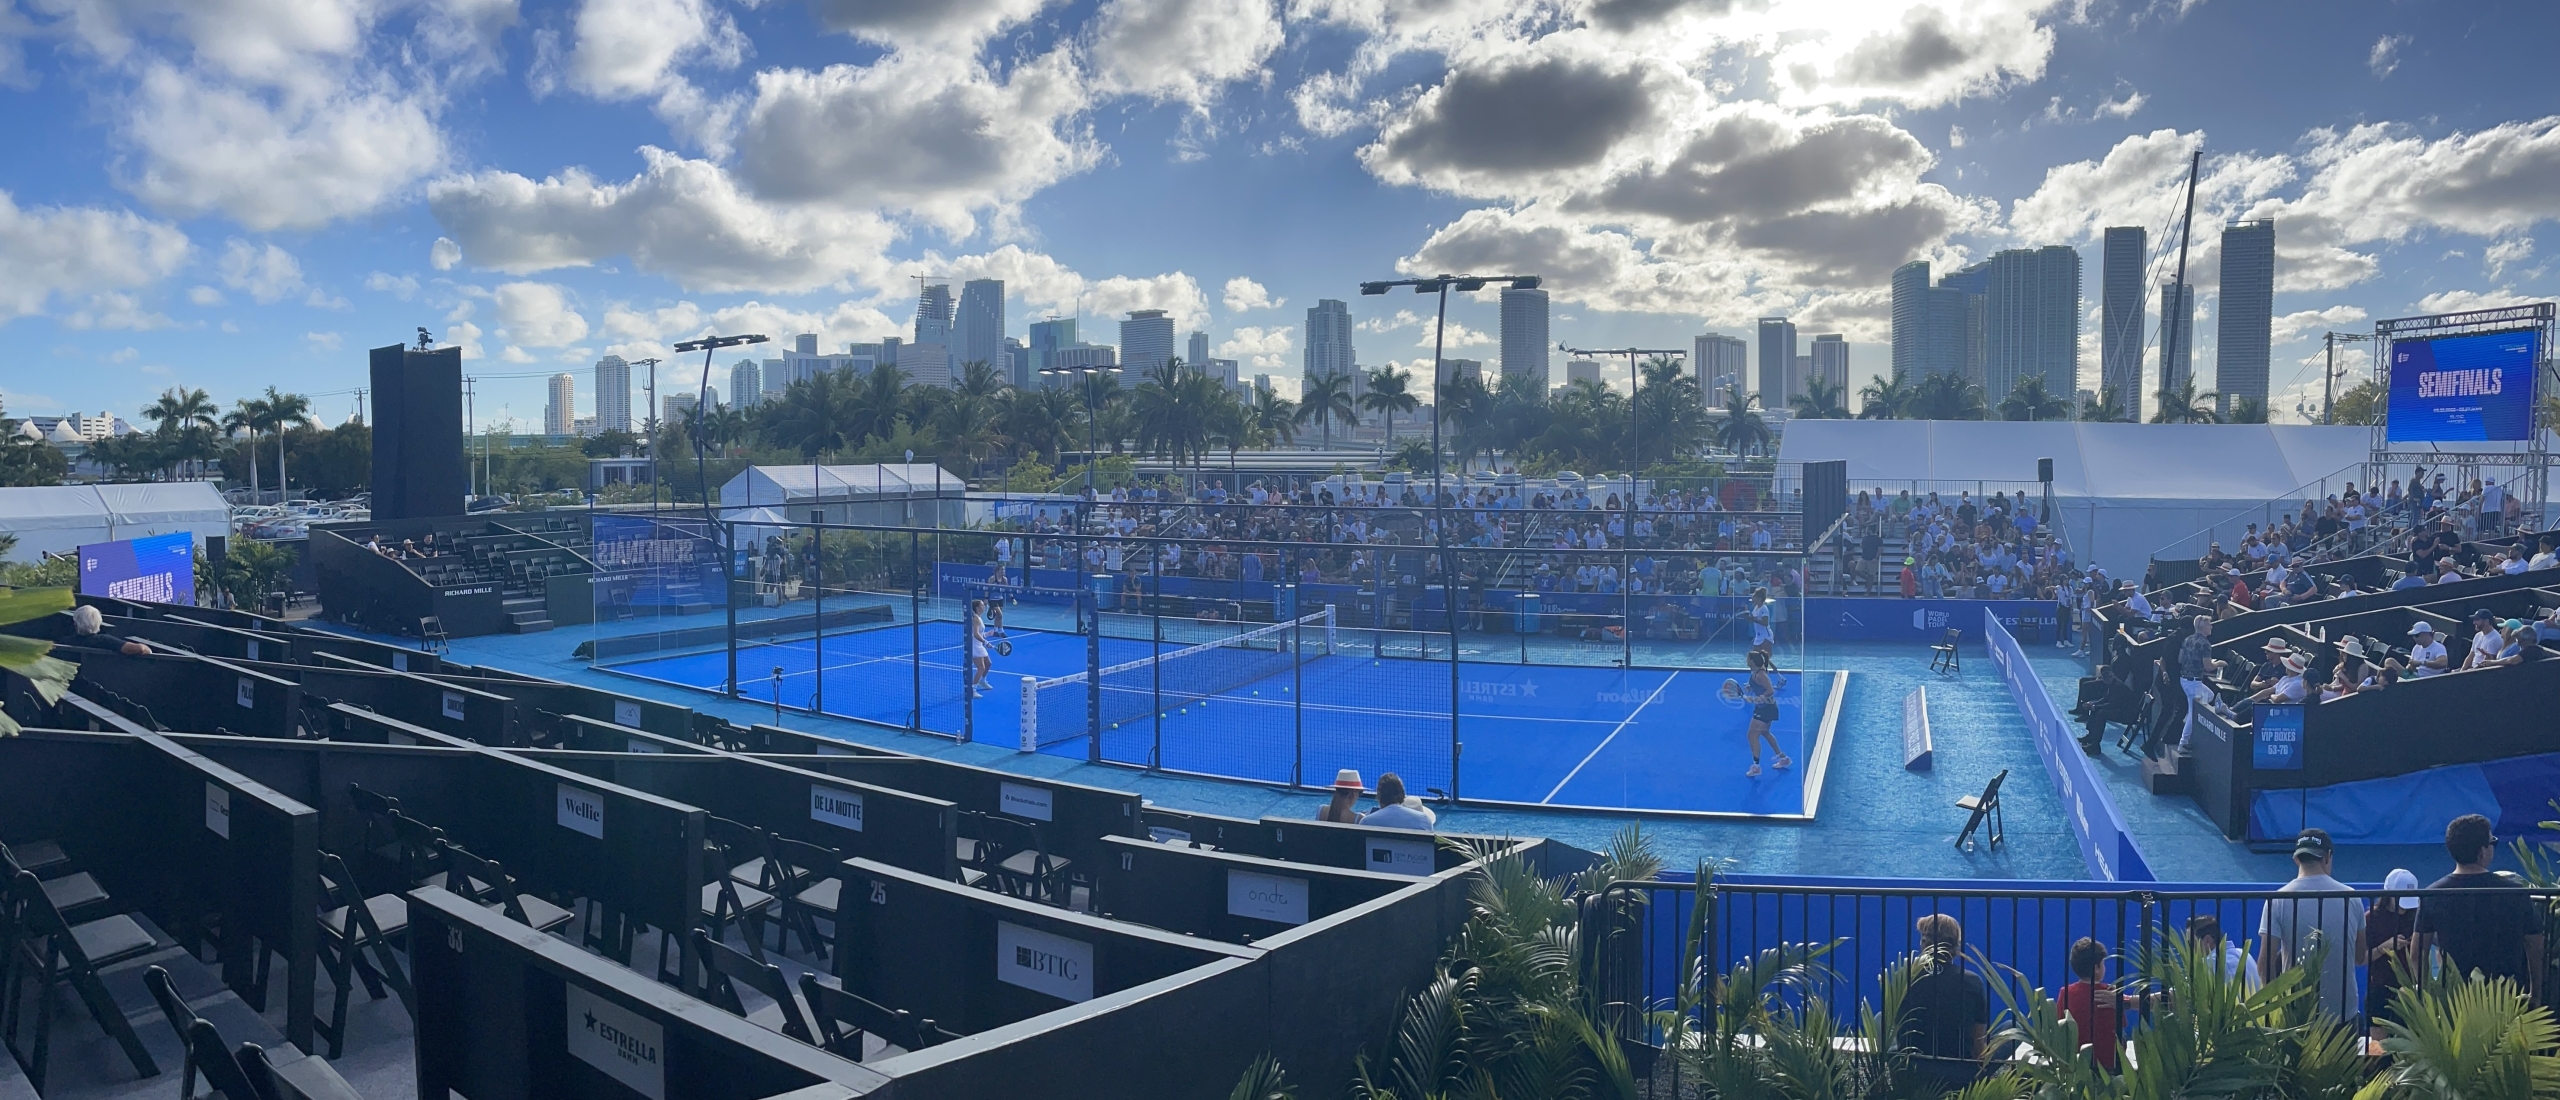 World Padel Tour Miami: A Fantastic Next Step for Padel in the US